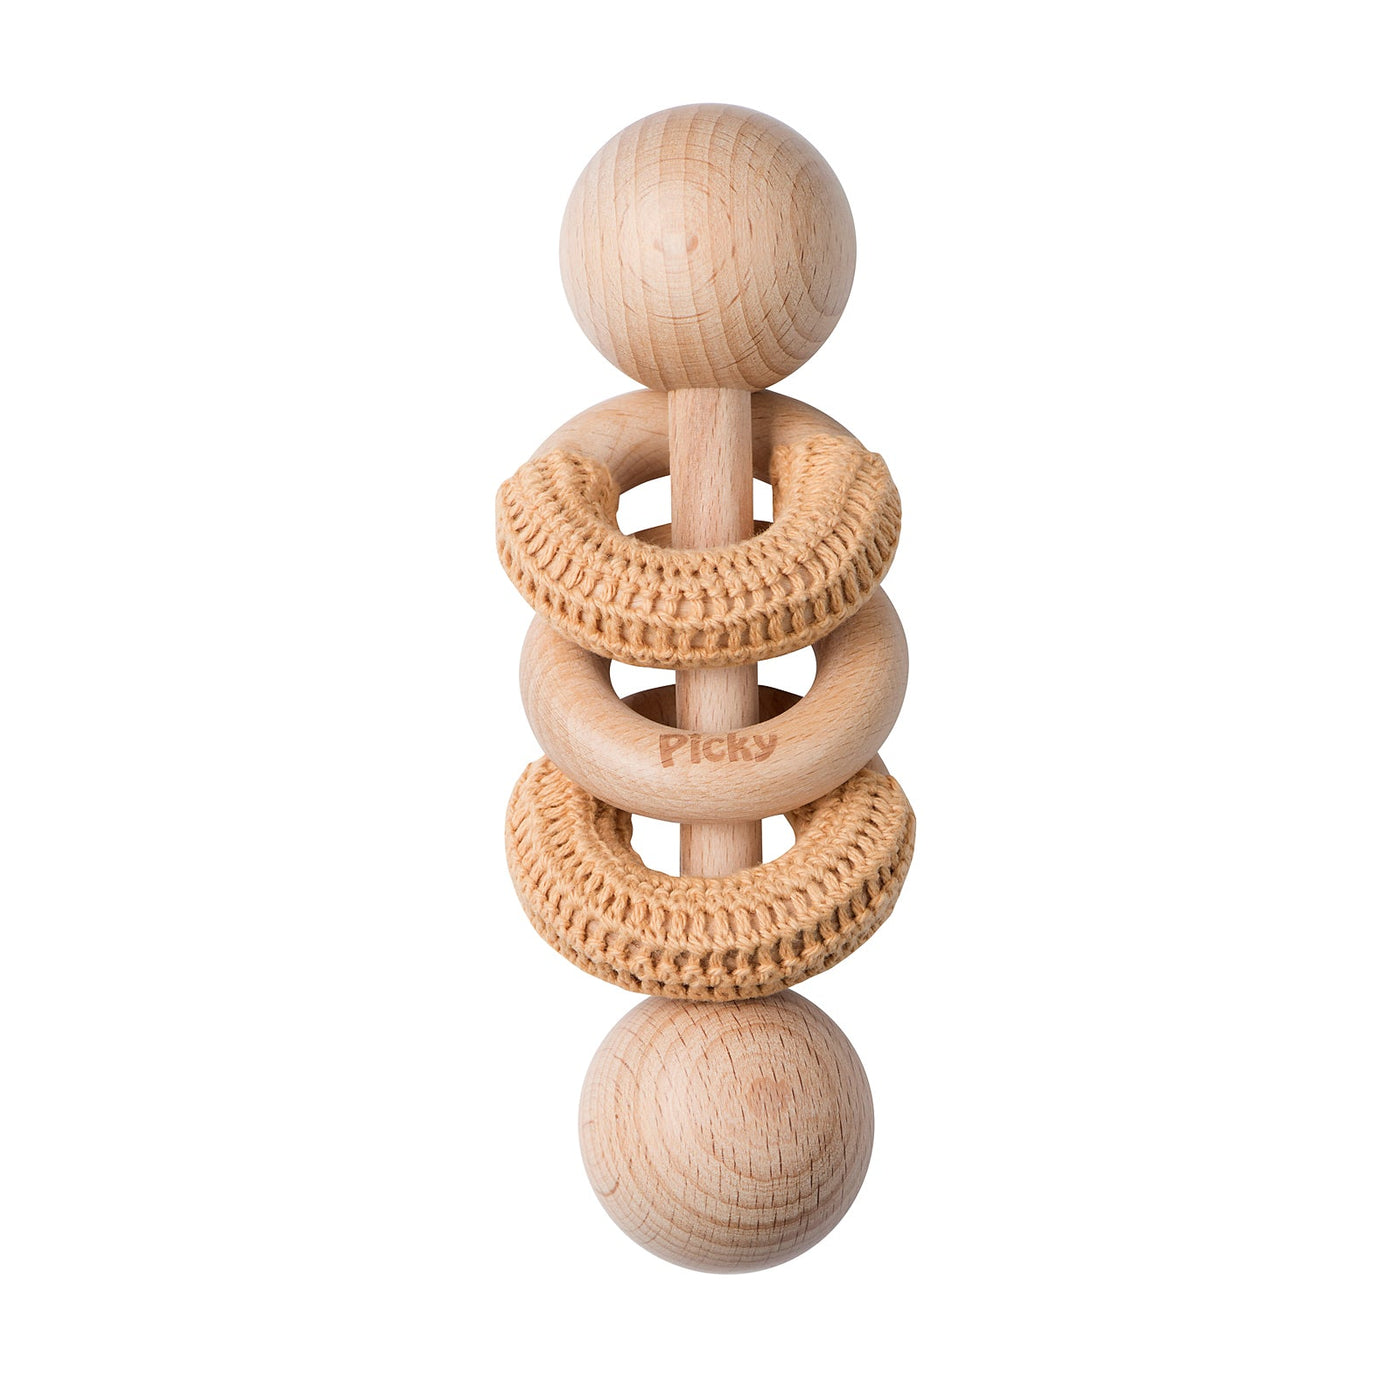 Picky Rattle with Crochet Rings Beige